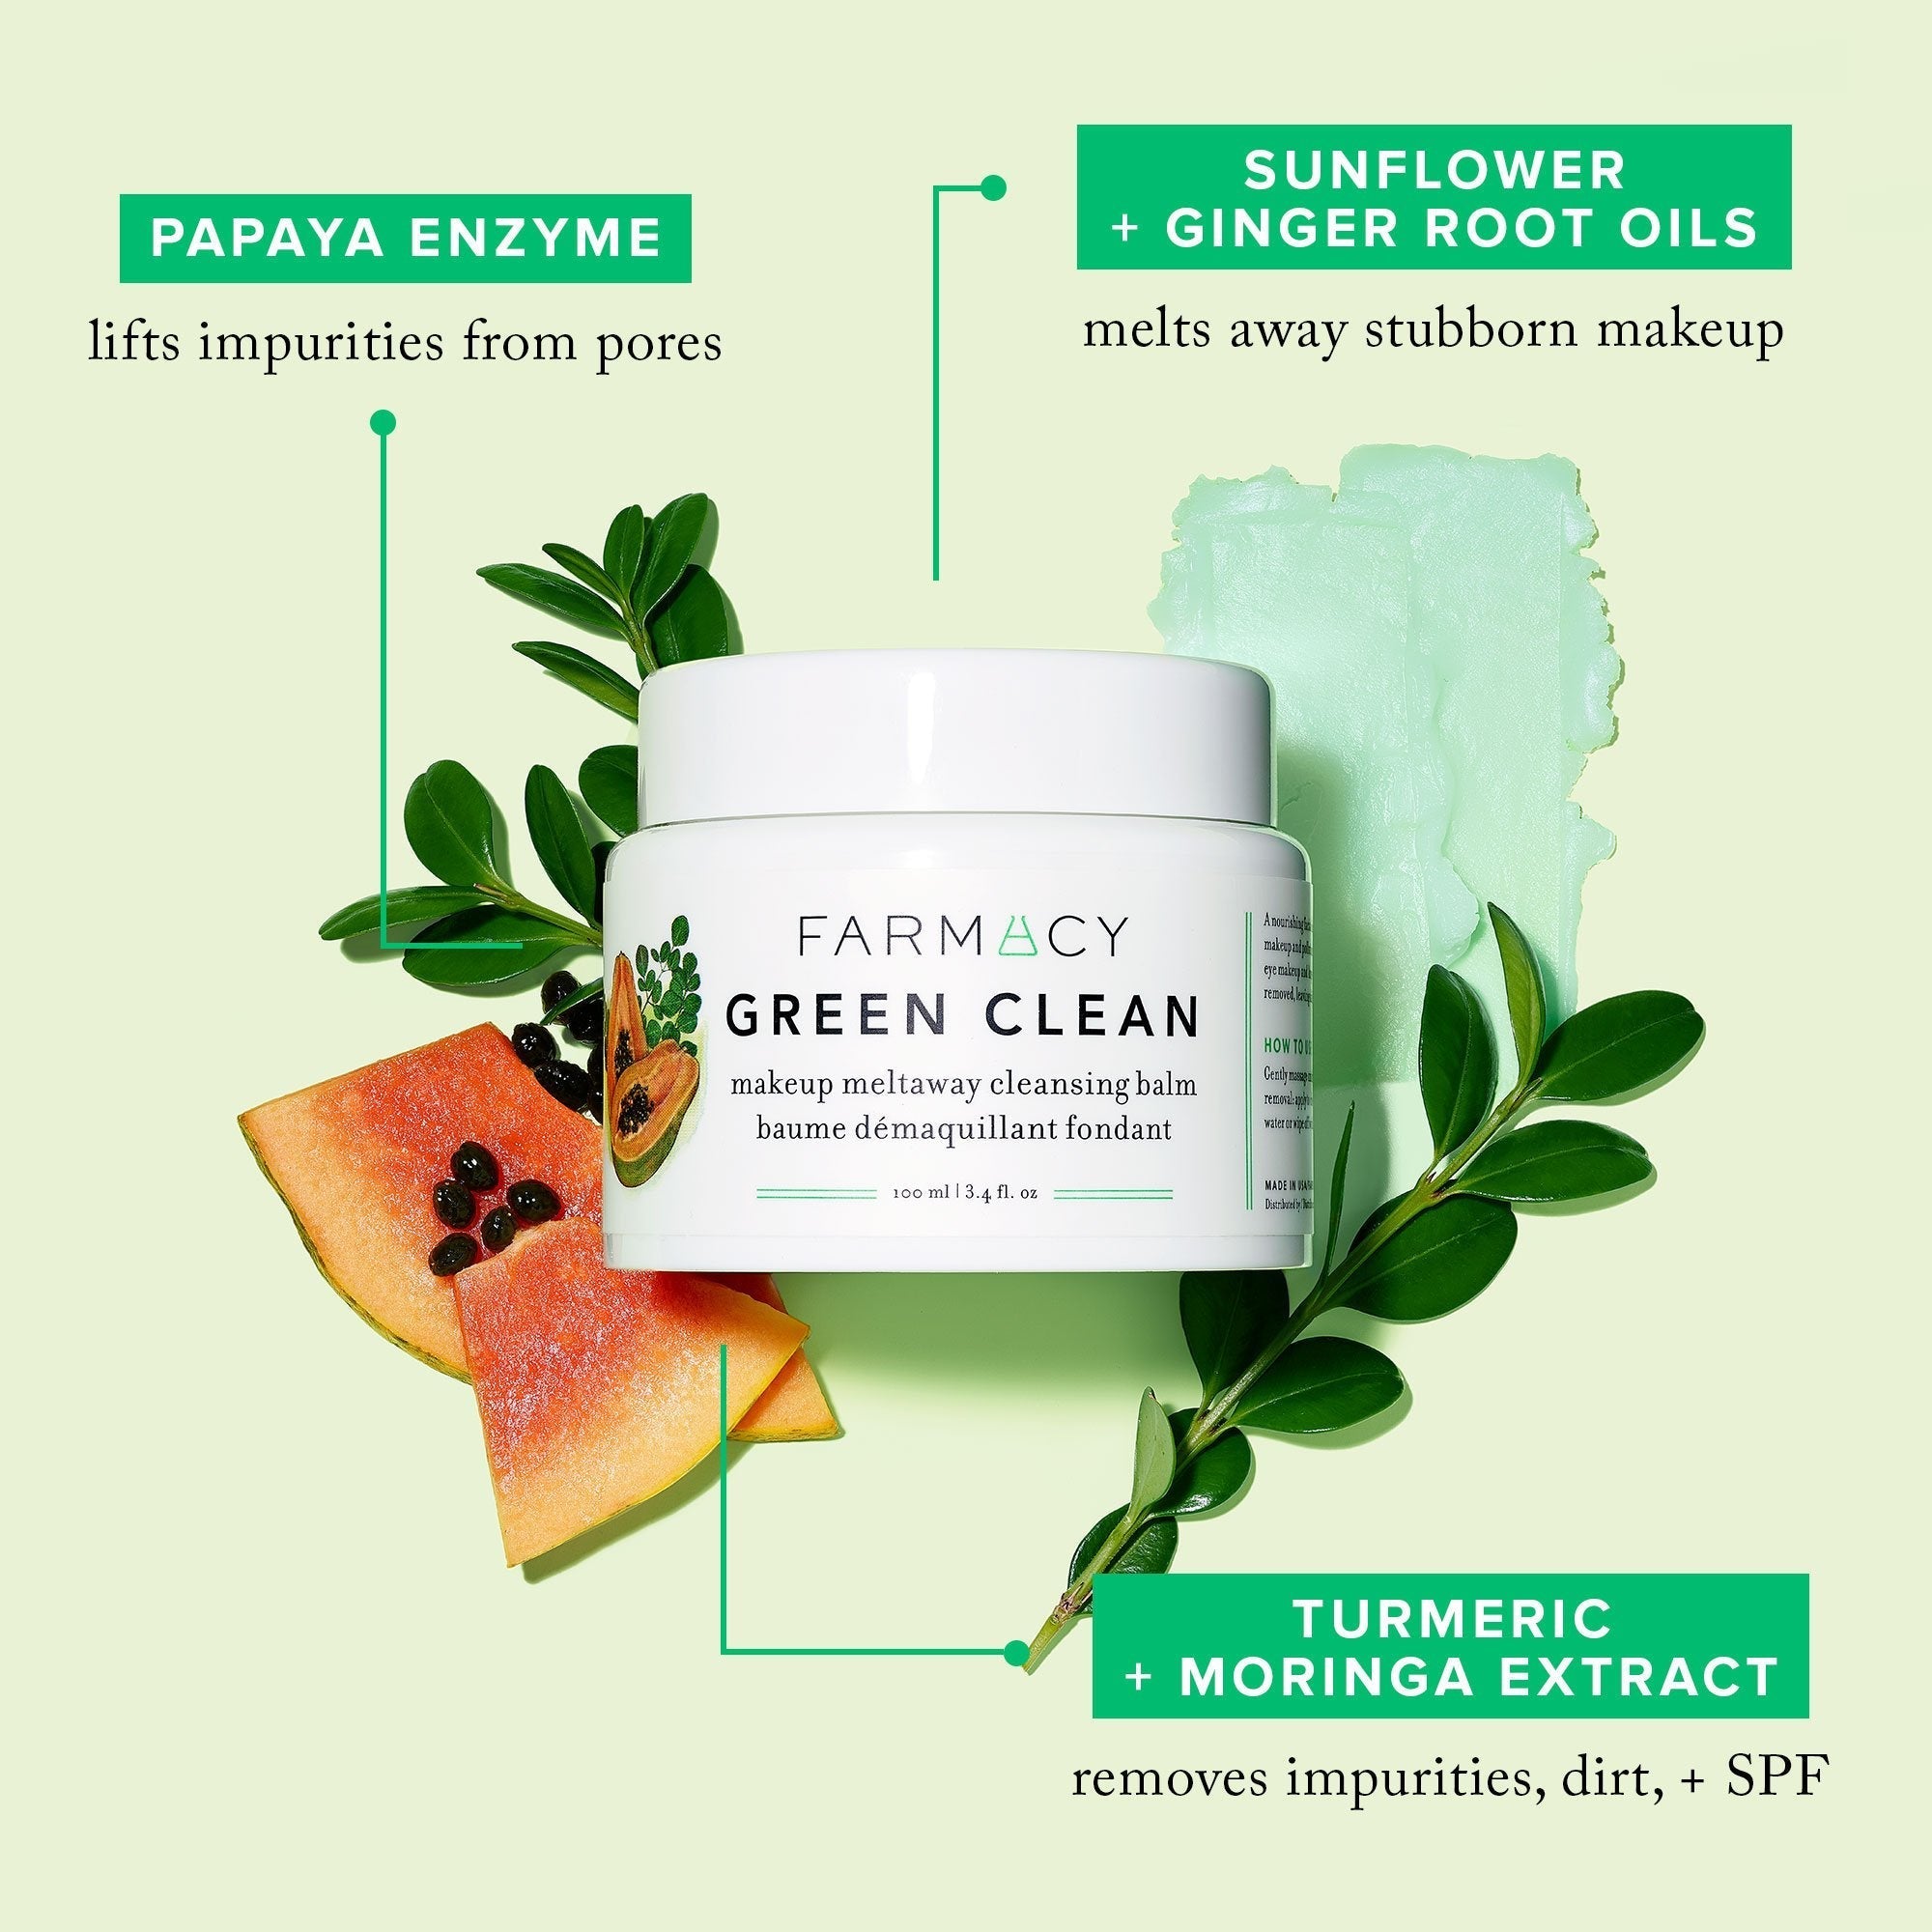 Farmacy Green Clean infographic outlining its skincare benefits